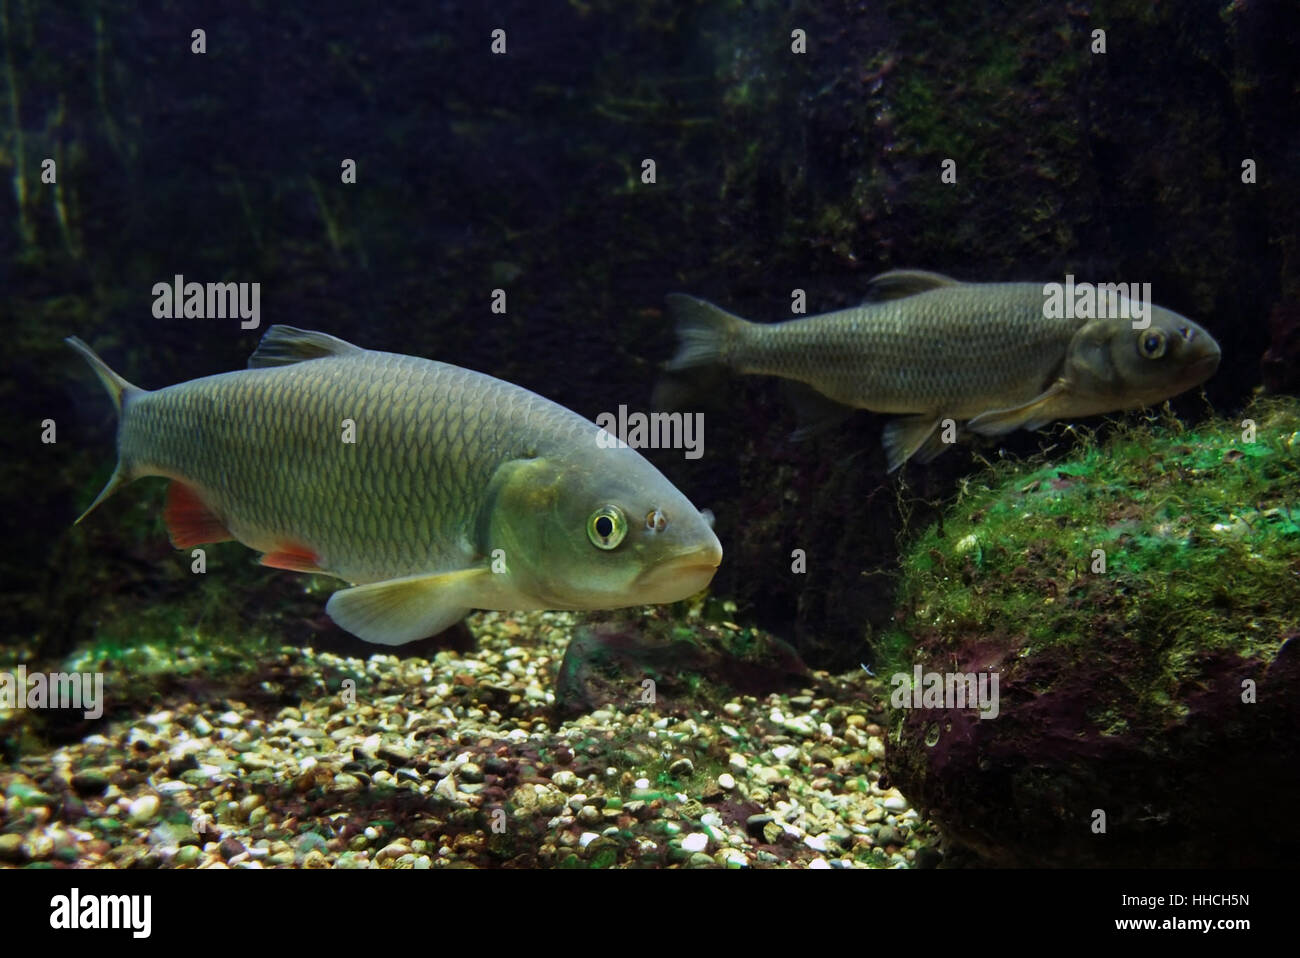 underwater scenery showing two fishes in freshwater ambiance Stock Photo